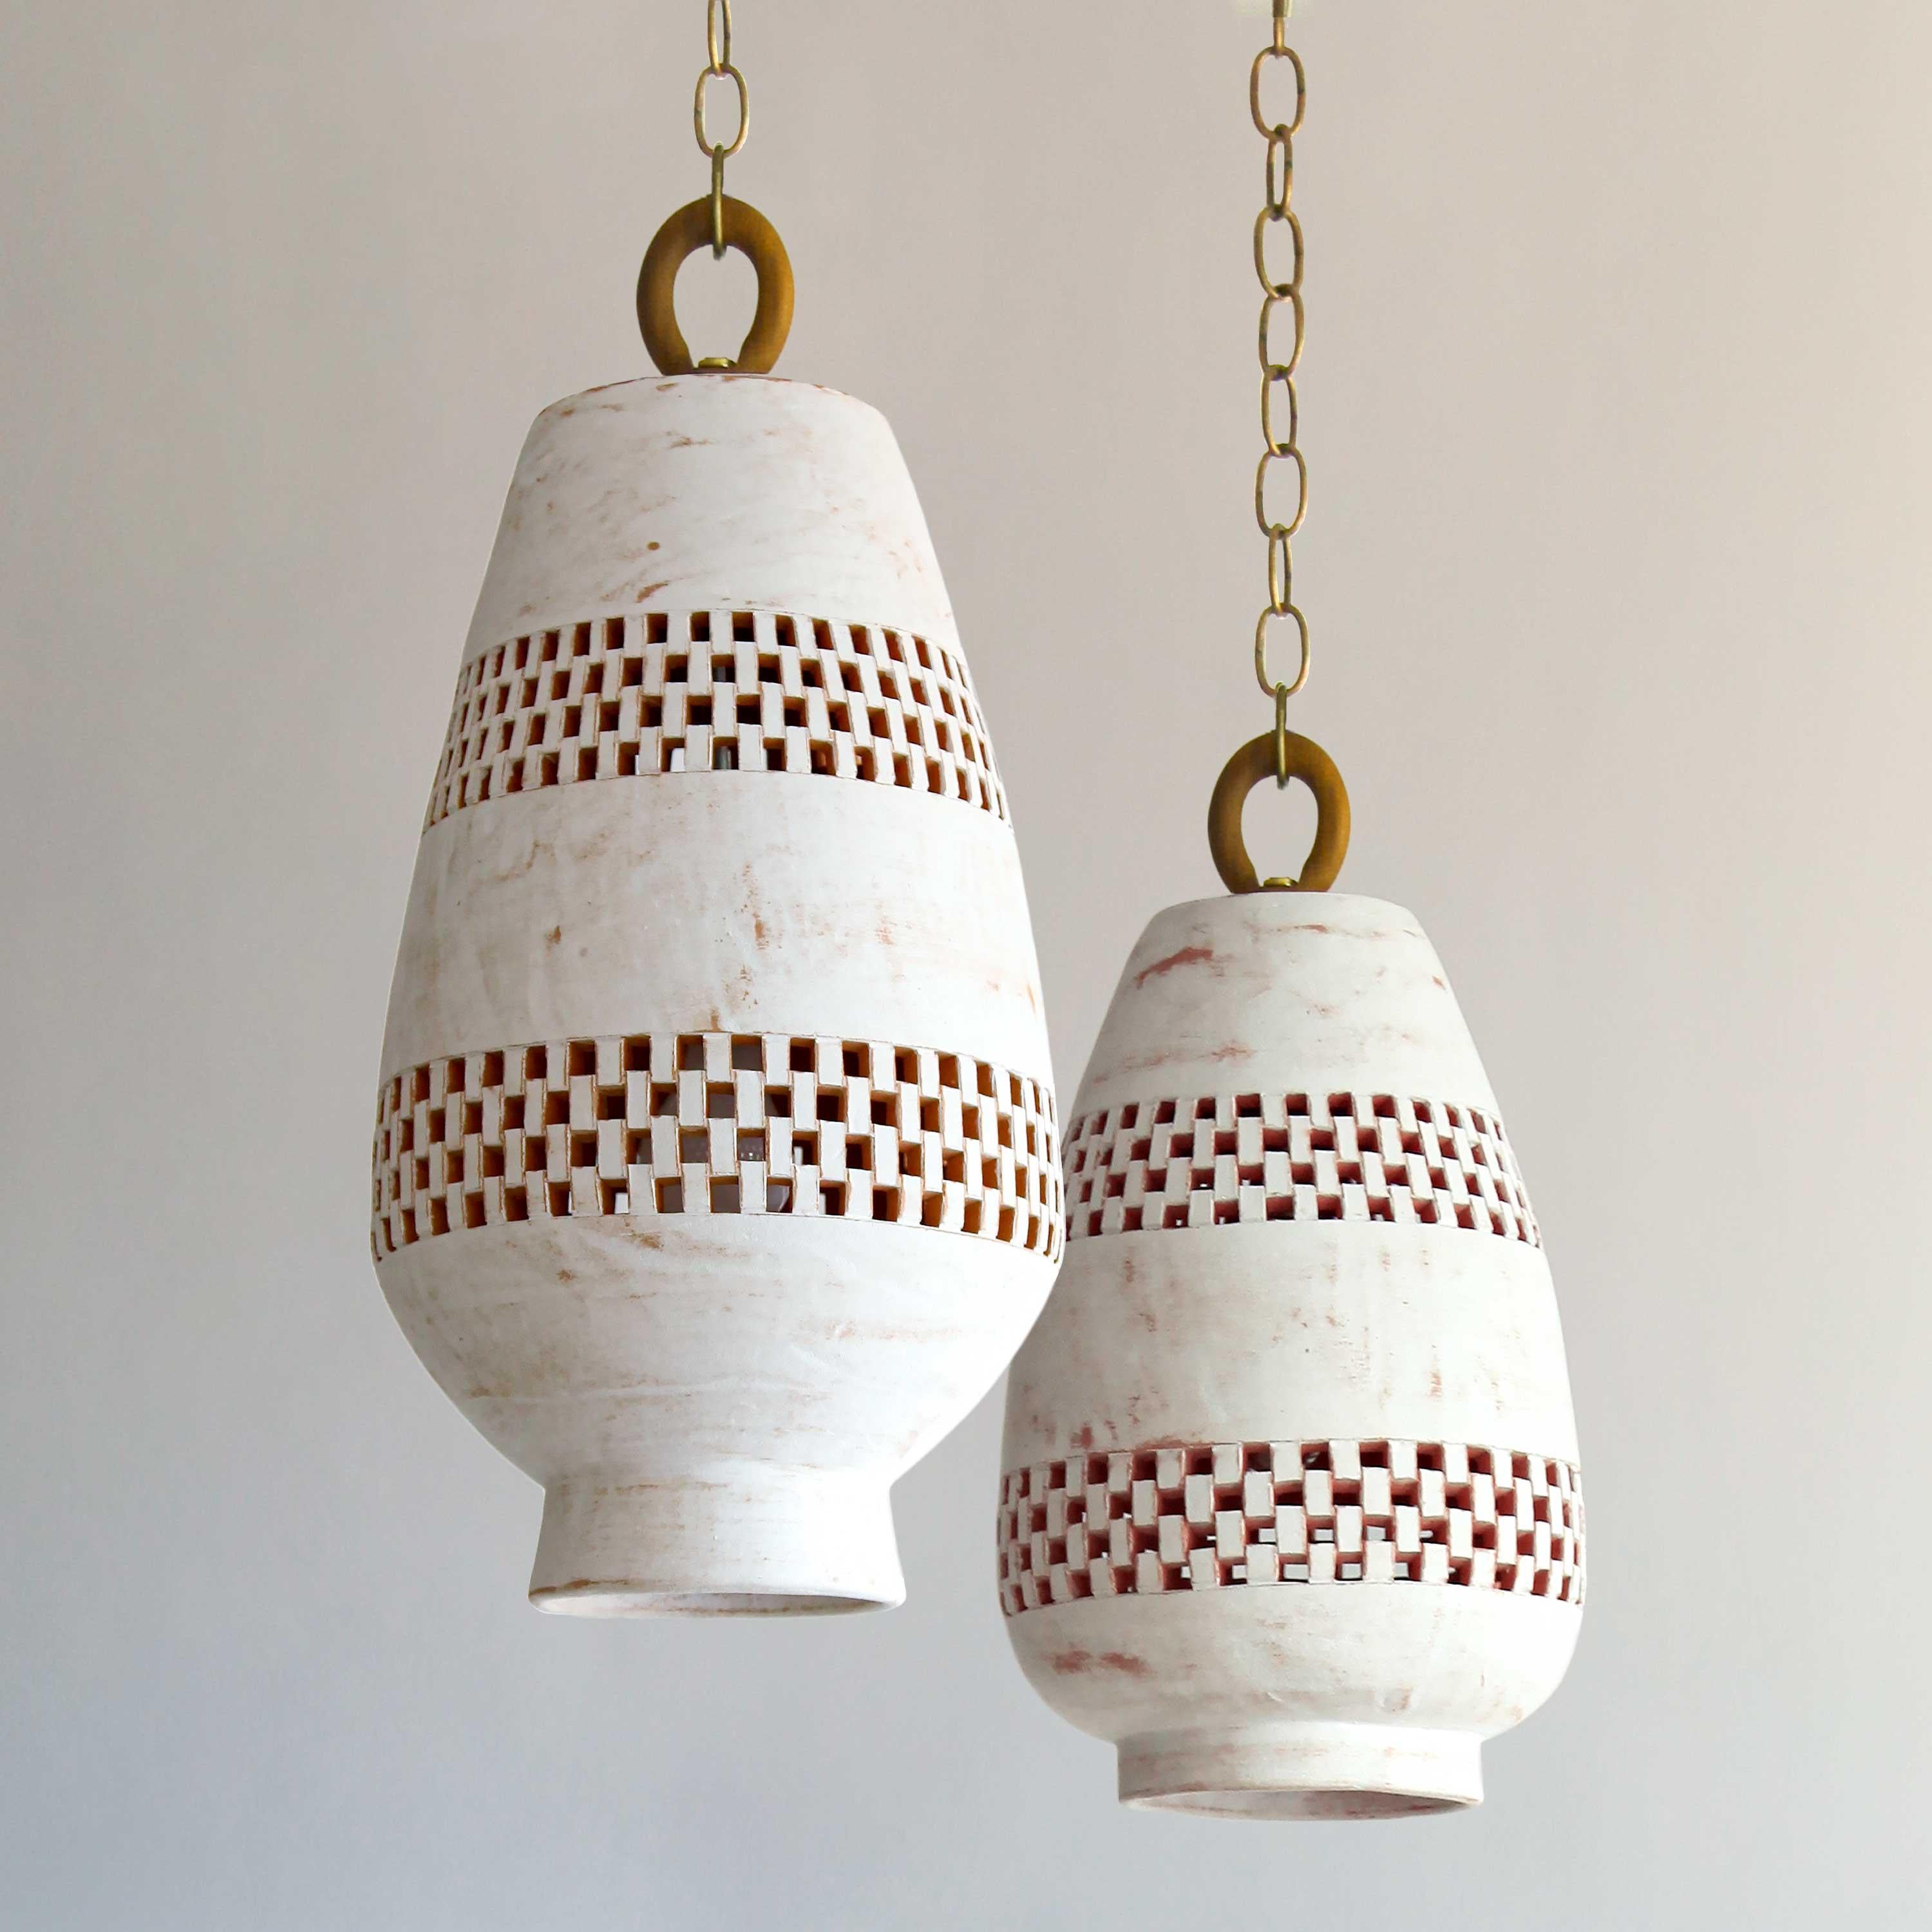 Mid-Century Modern Small White Ceramic Pendant Light, Aged Brass, Ajedrez Atzompa Collection For Sale